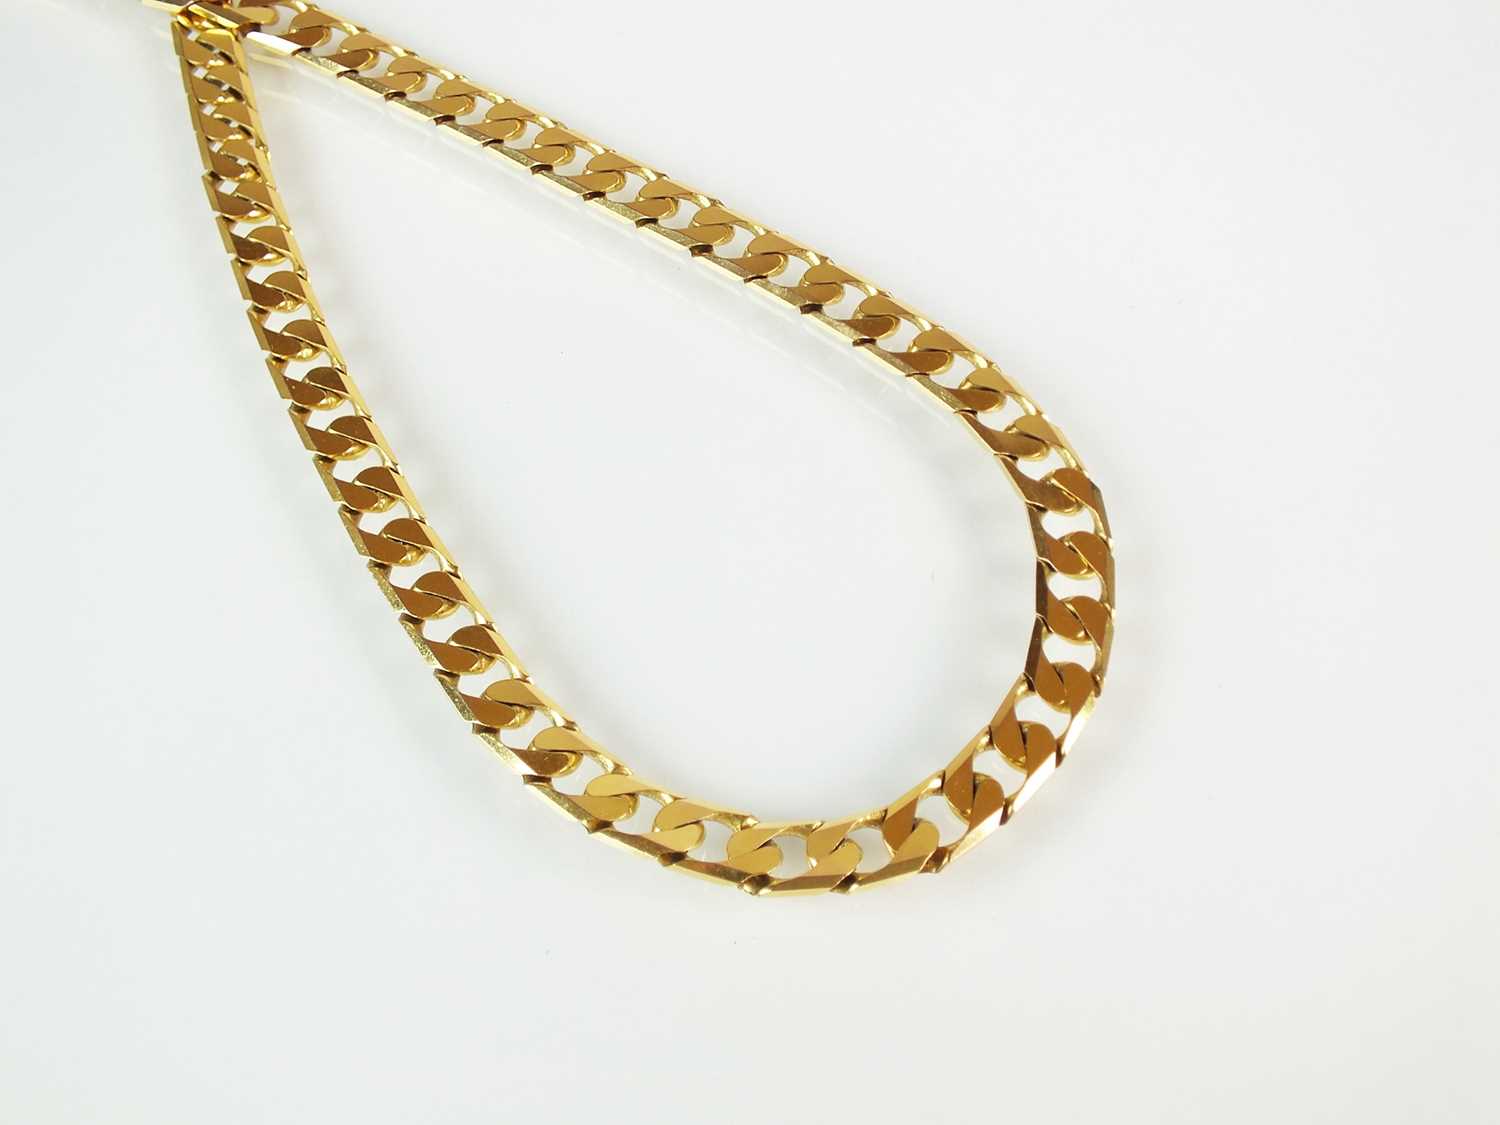 Lot 49 - A 9ct yellow gold flat curb link chain necklace